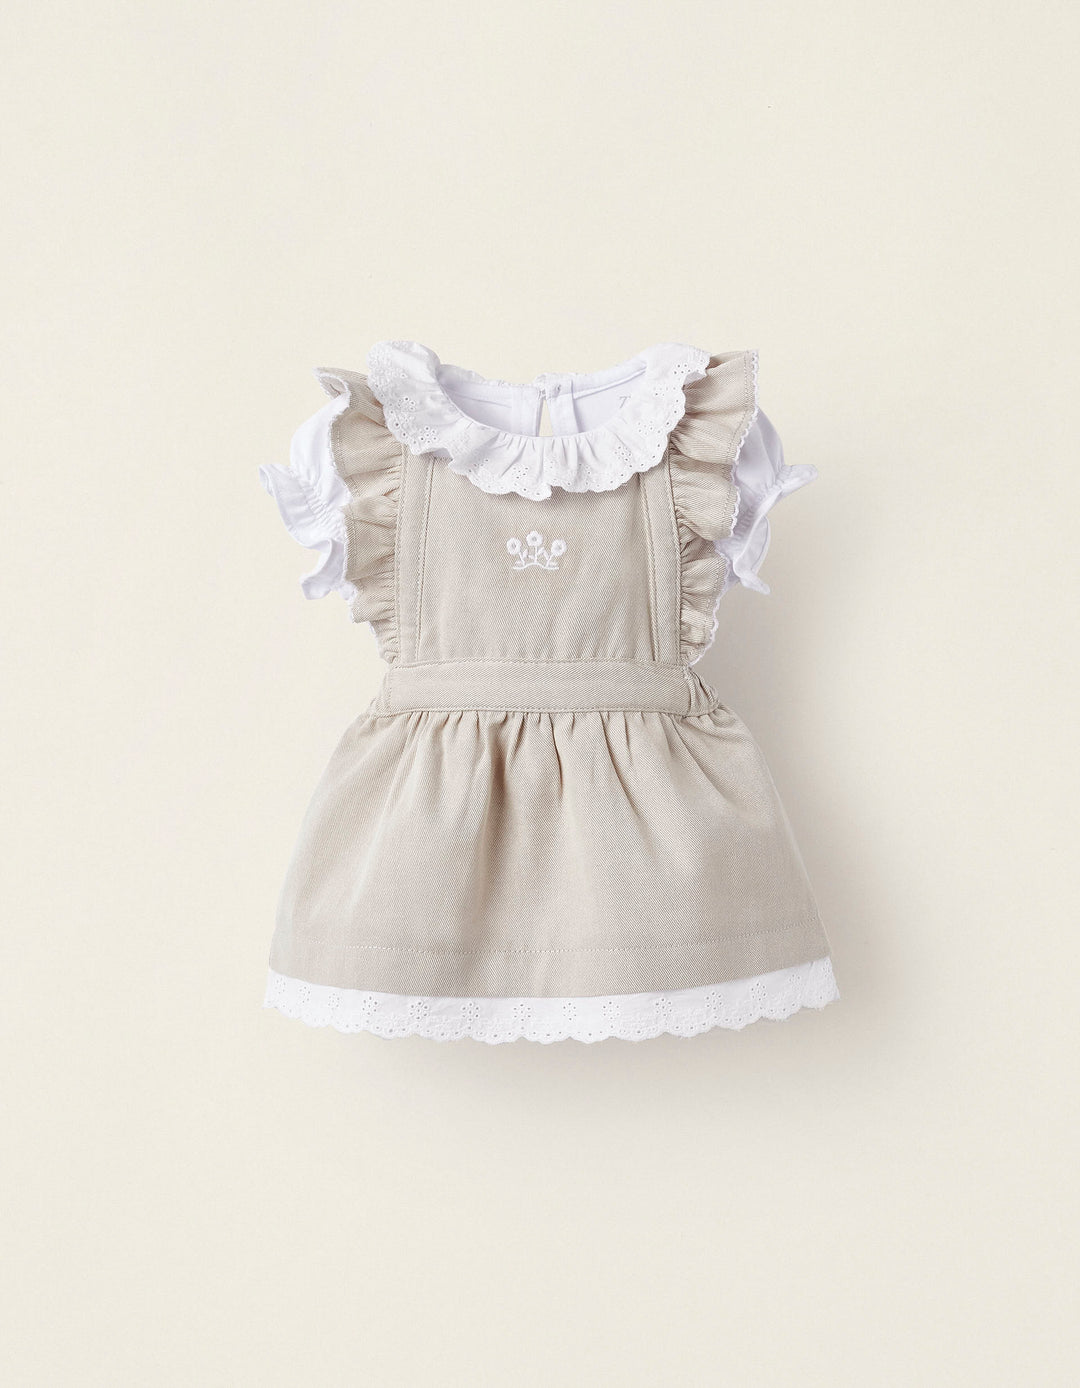 T-shirt + Dress with English Embroidery for Newborn Baby Girls, Beige/White